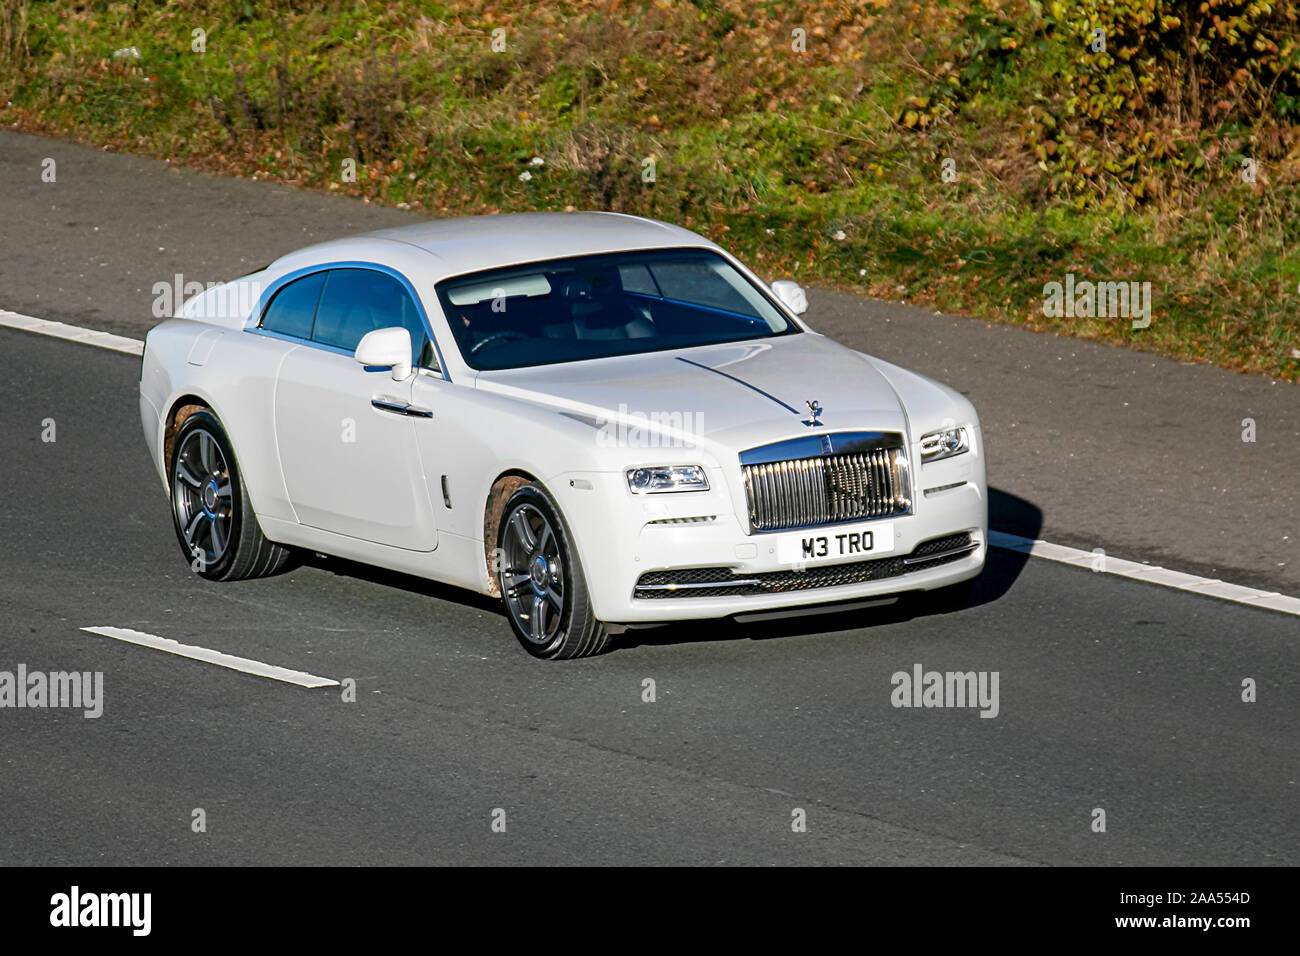 Used Rolls Royce Wraith in UK for sale 32  AutoUncle